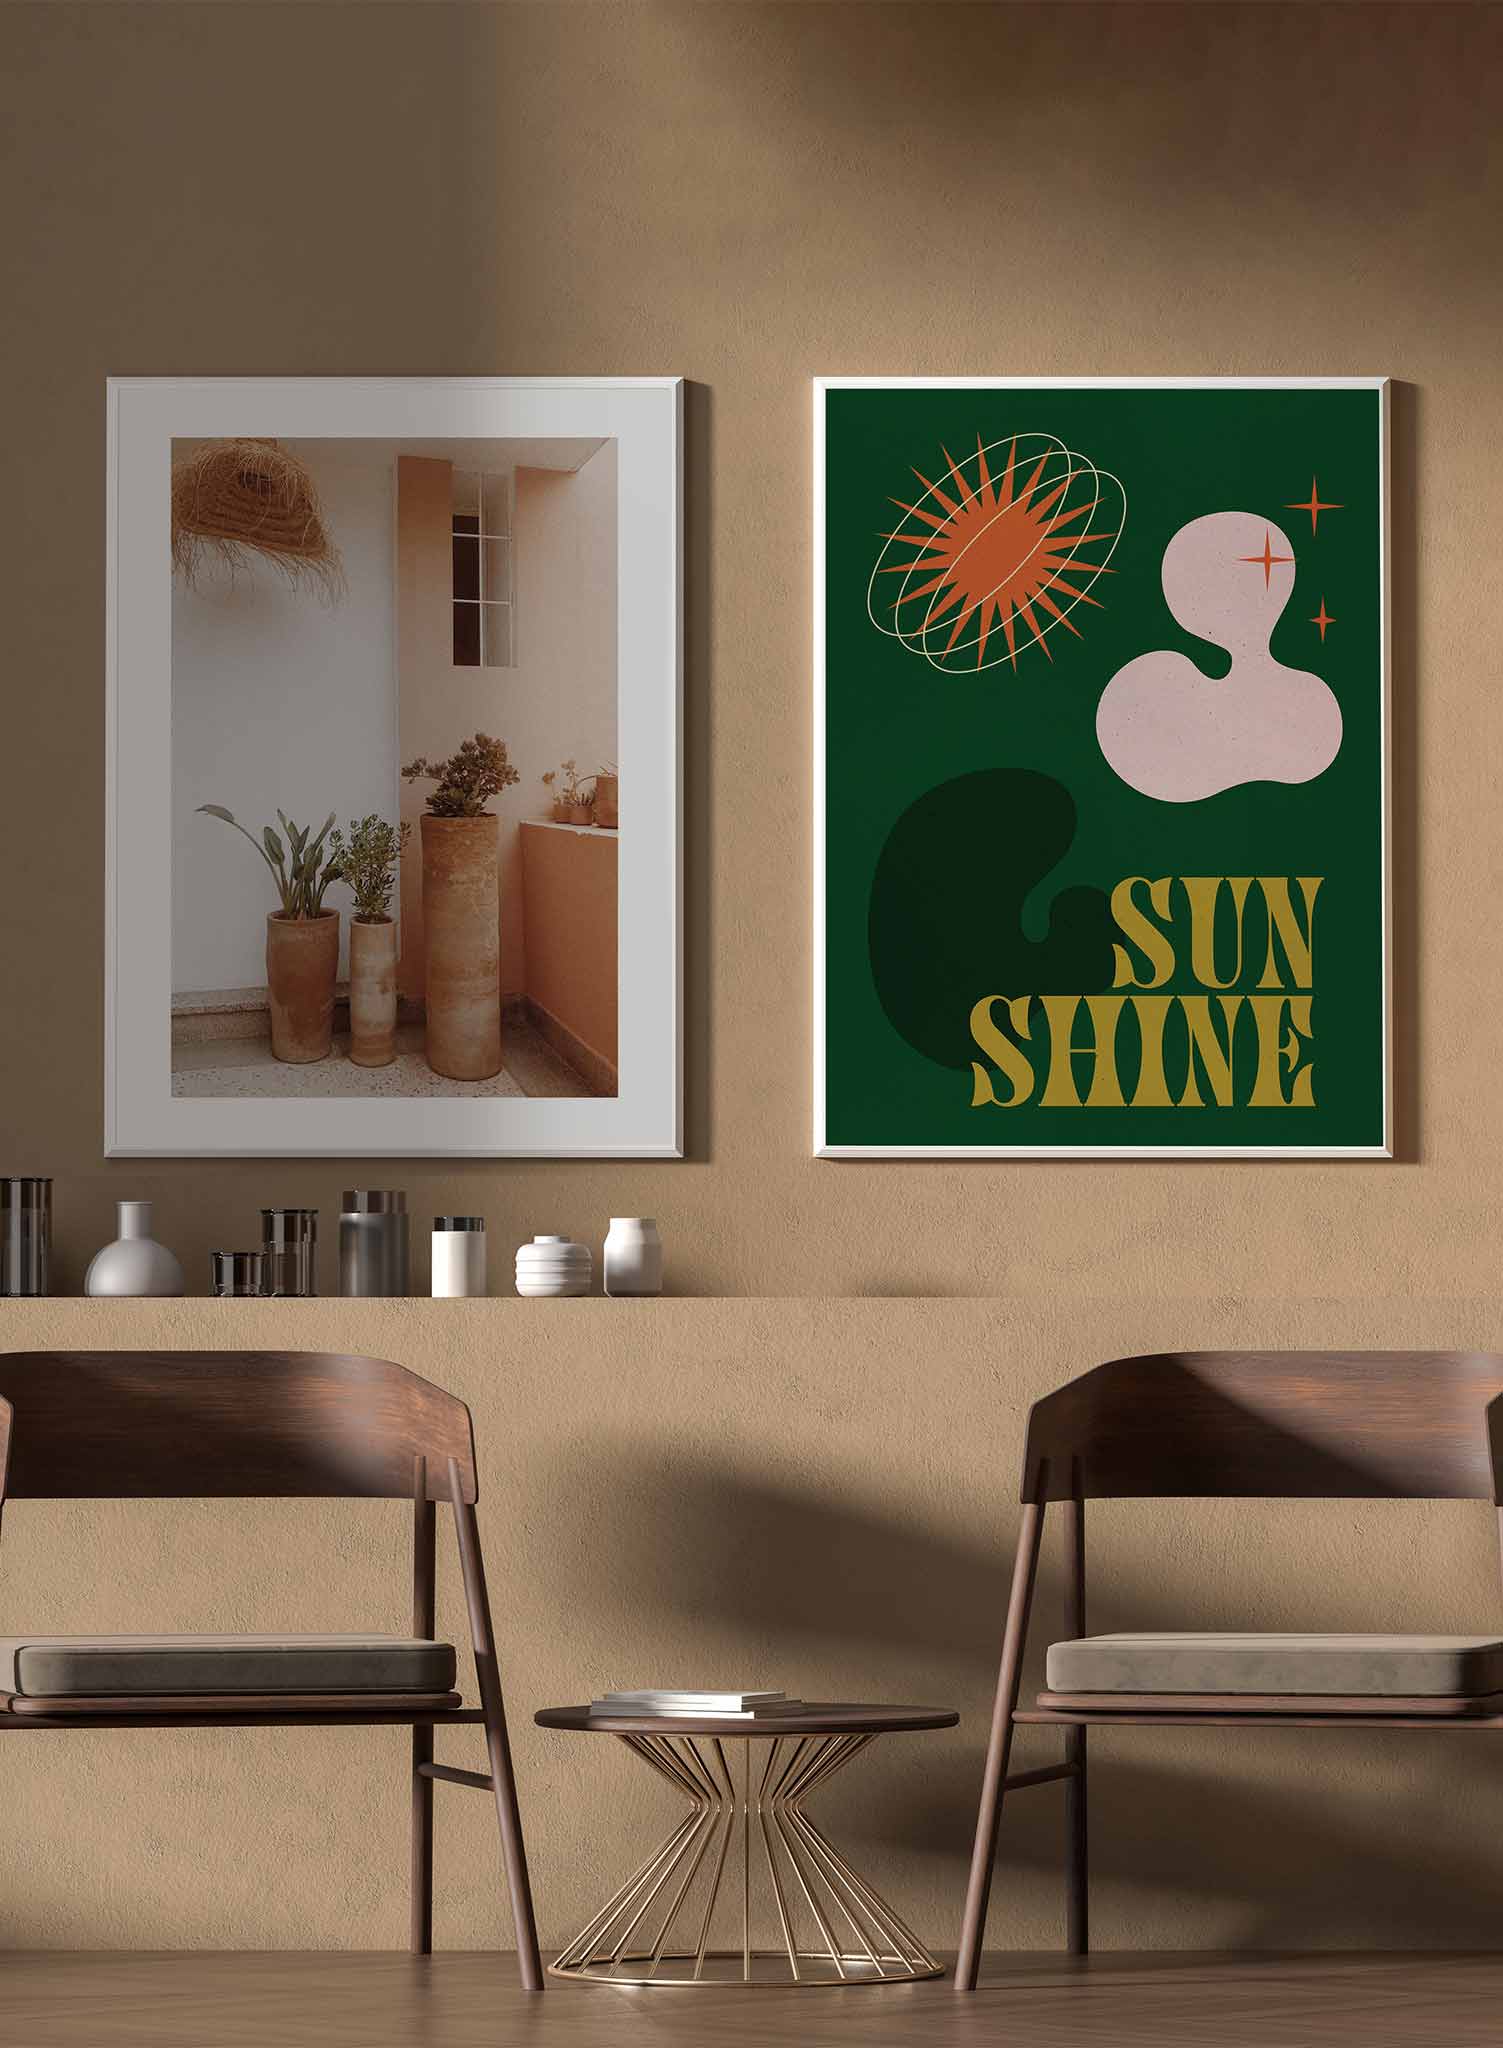 Groovy Sunshine in Green is a colourful and vintage shapes and typography poster by Opposite Wall.